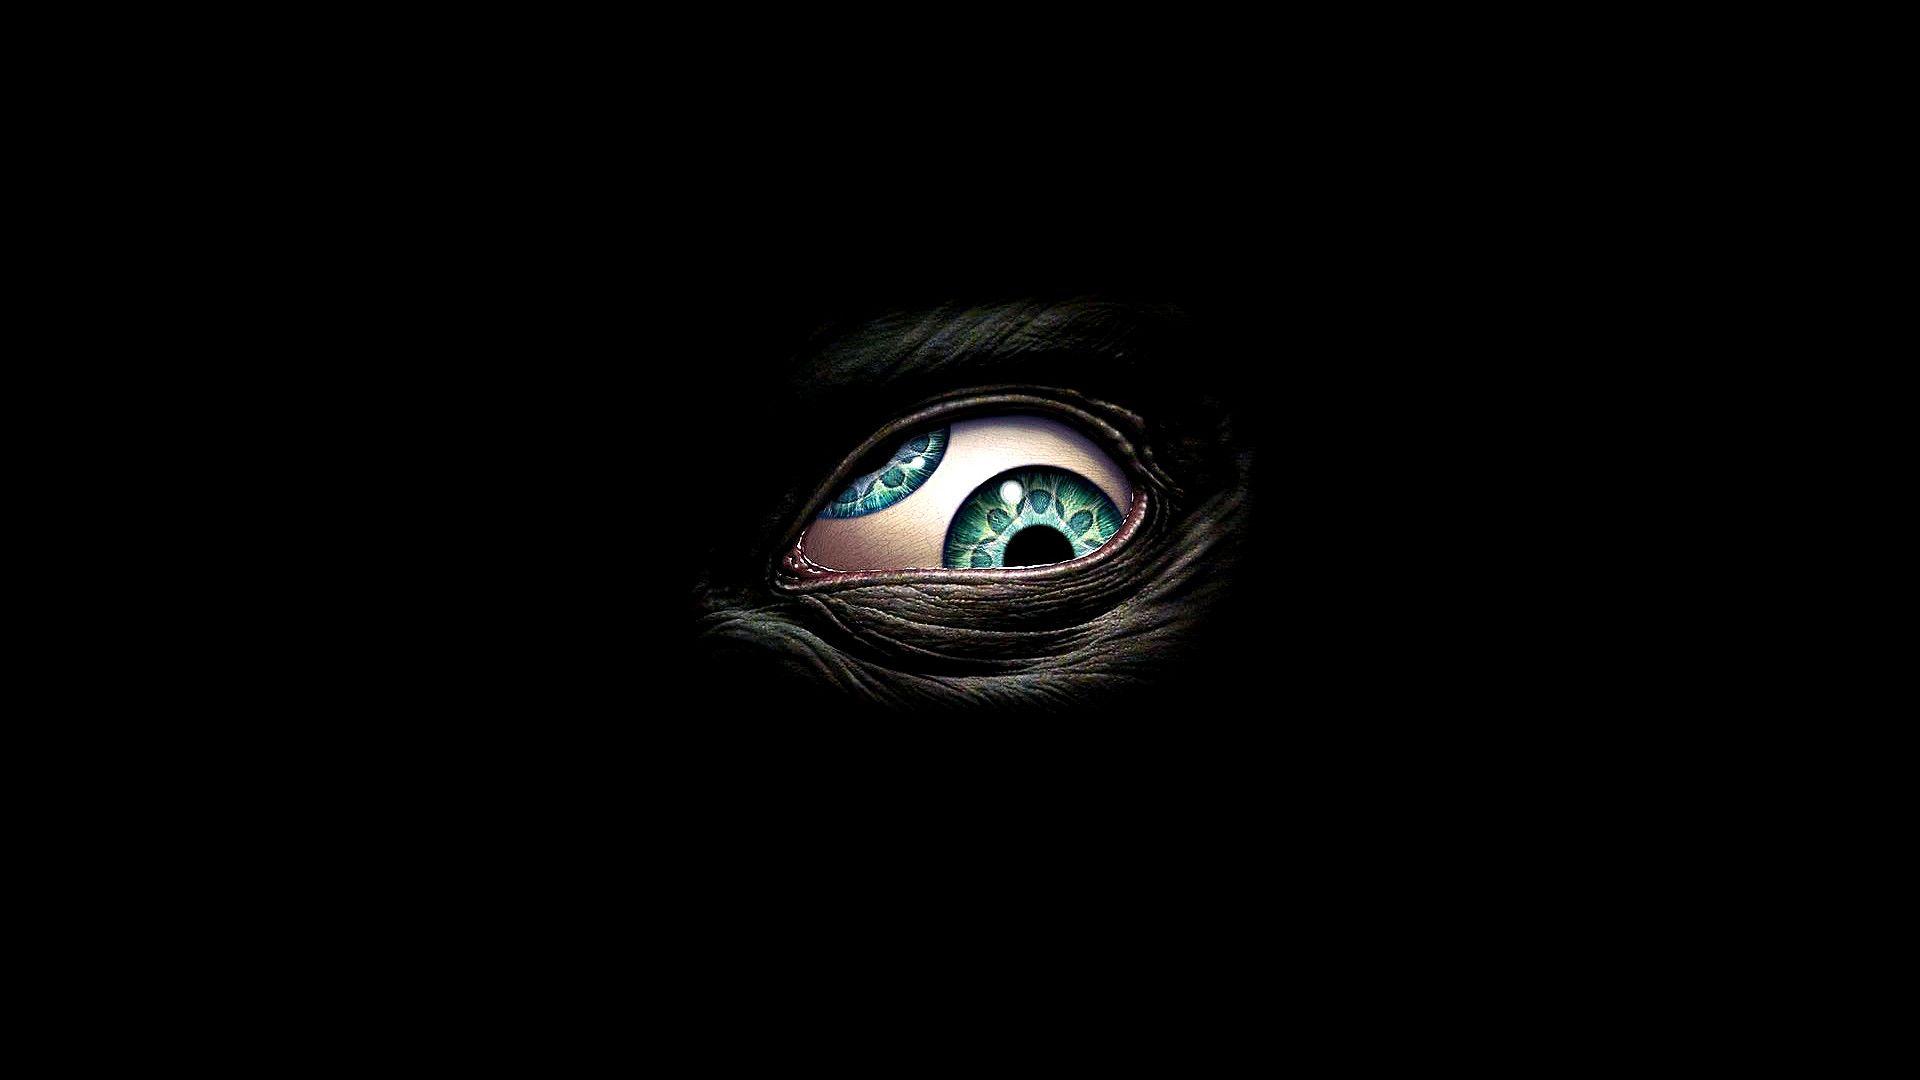 Evil Wolf Eyes Wallpapers - Top Free Evil Wolf Eyes Backgrounds